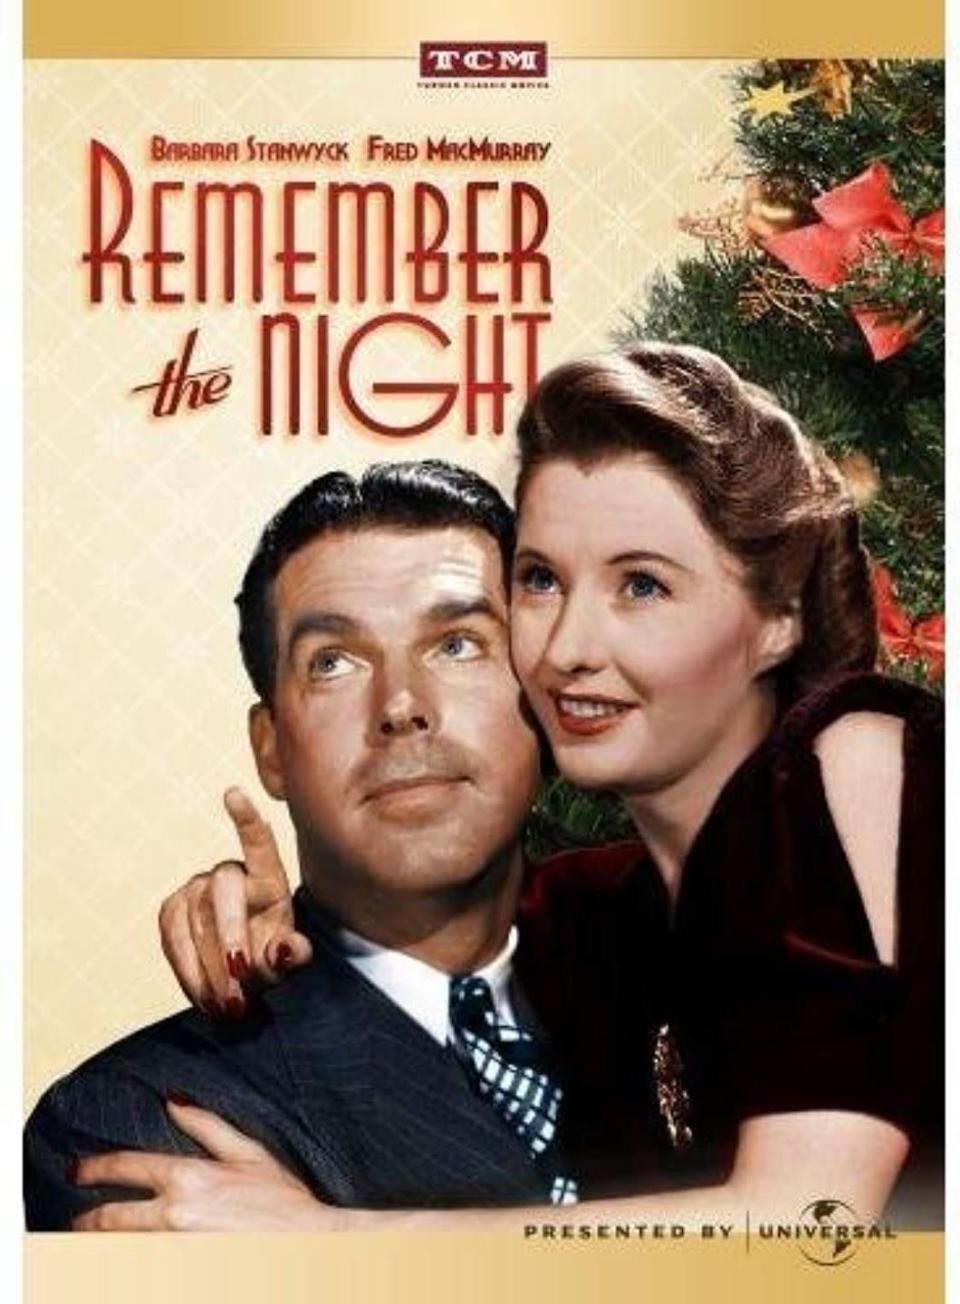 <p>When Barbara Stanwyck's character gets arrested for shoplifting right before Christmas in this rom-com, it's up to the D.A. (played by Fred MacMurray) to help her get out of jail.</p><p><a class="link rapid-noclick-resp" href="https://www.amazon.com/Remember-Night-Barbara-Stanwyck/dp/B0047O2FPI/?tag=syn-yahoo-20&ascsubtag=%5Bartid%7C10067.g.38414559%5Bsrc%7Cyahoo-us" rel="nofollow noopener" target="_blank" data-ylk="slk:WATCH NOW">WATCH NOW</a></p>